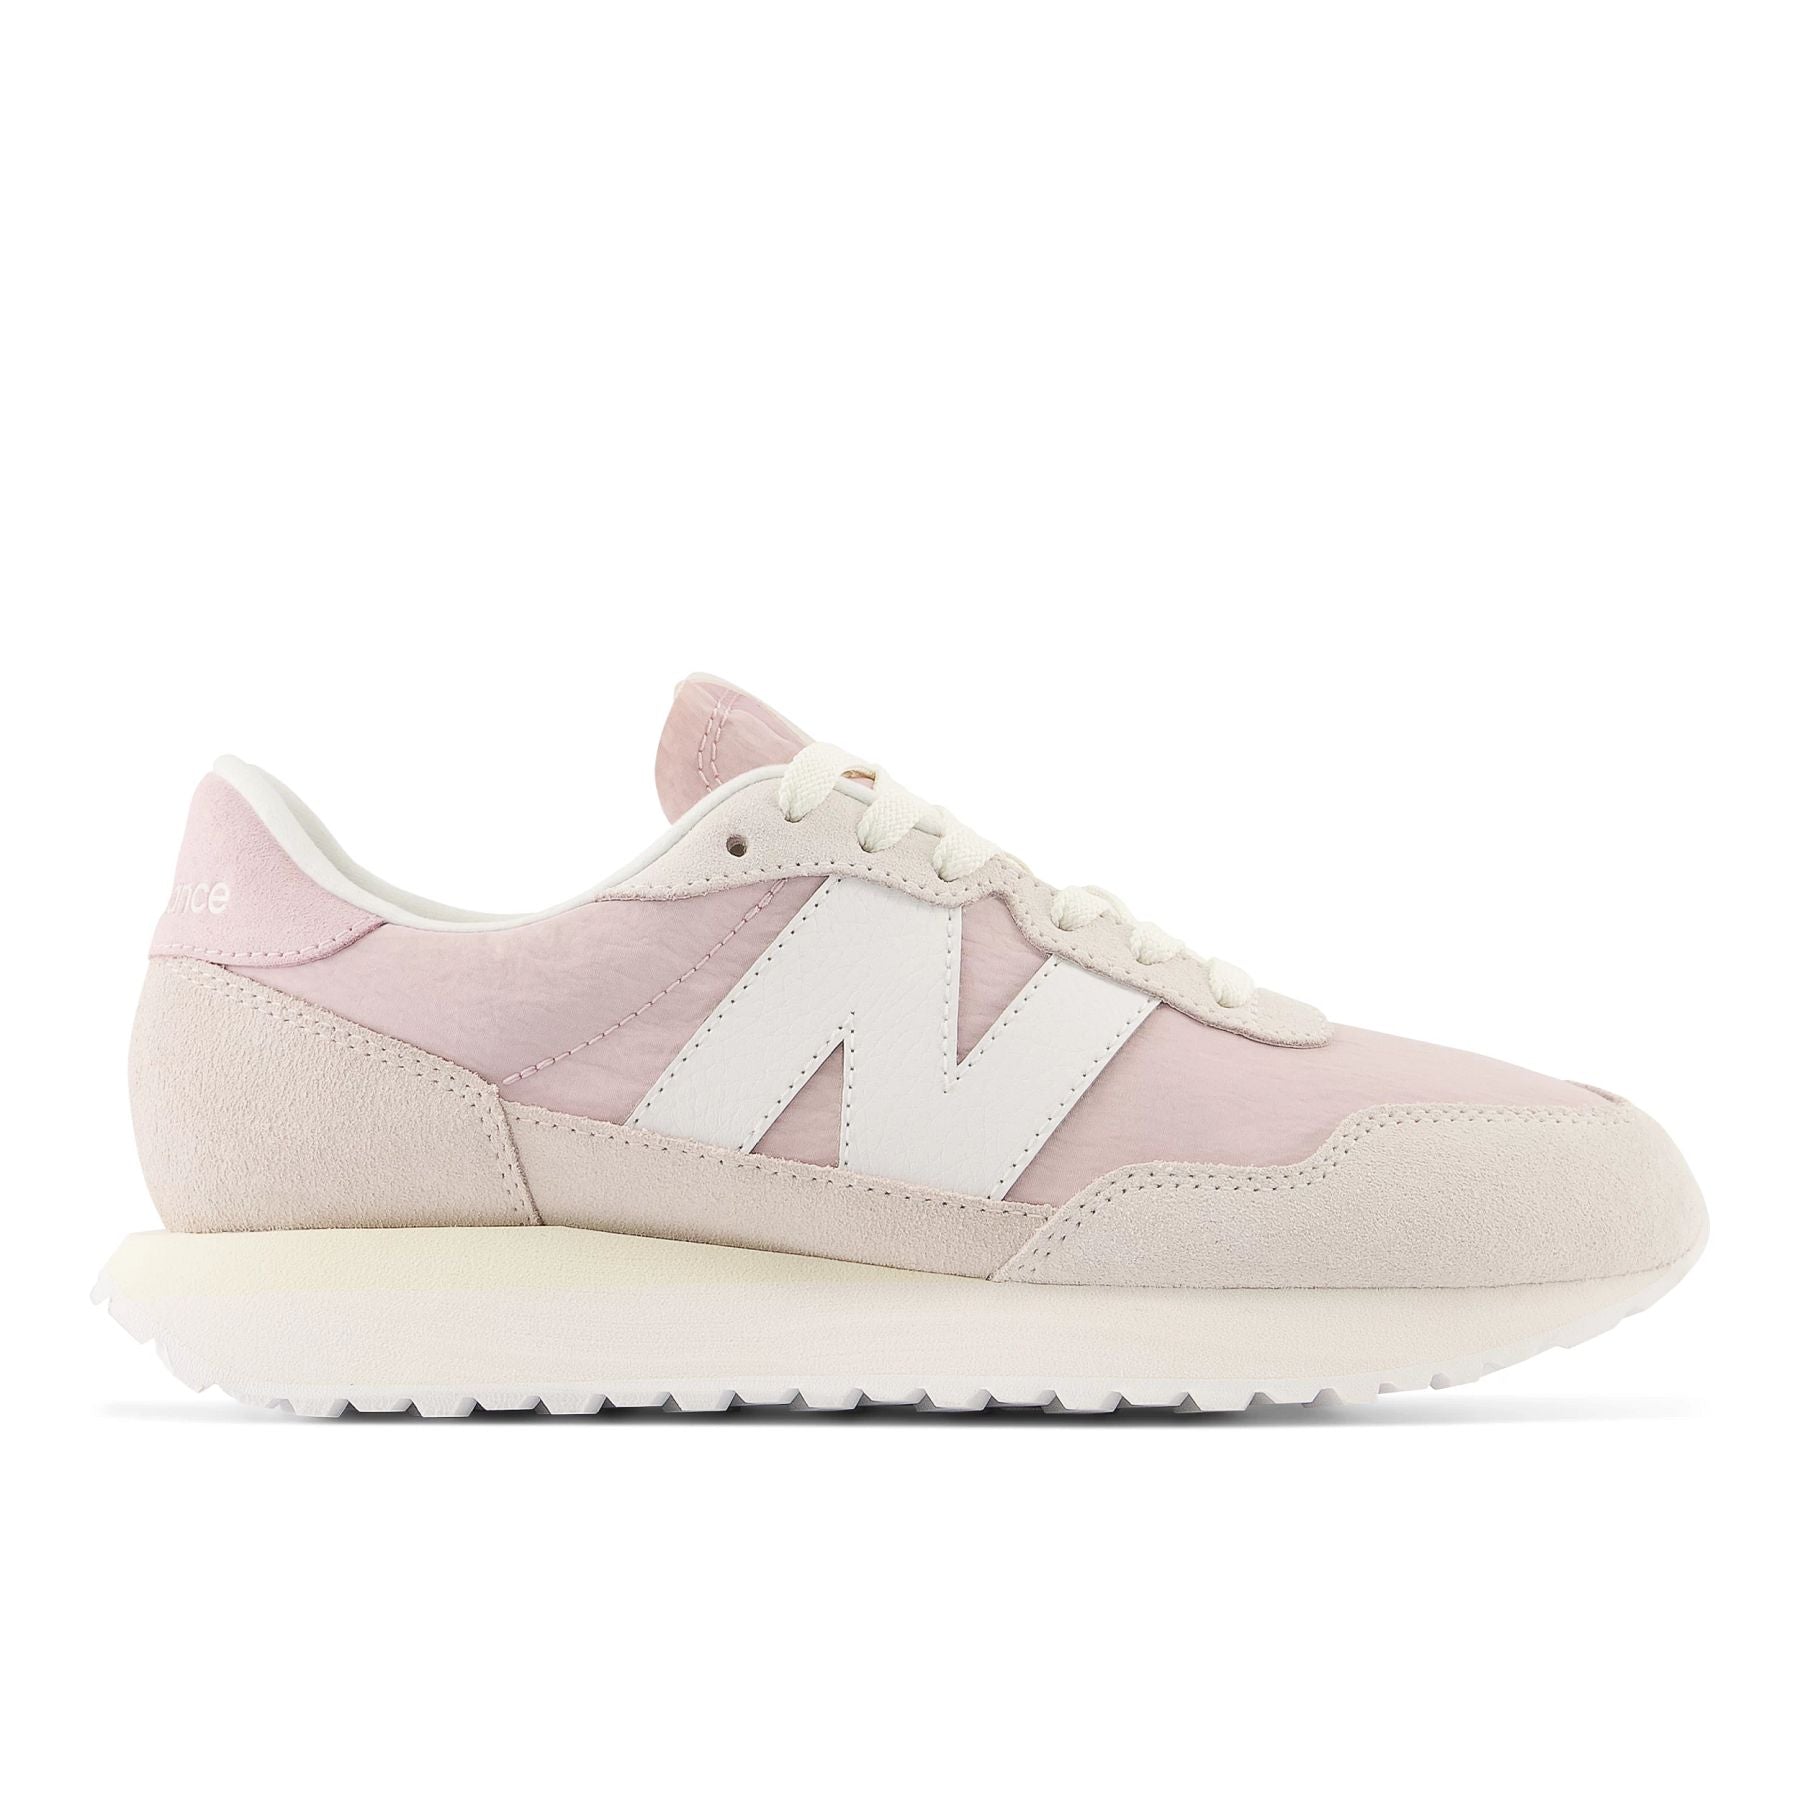 Lateral view of the Women's New Balance lifestyle 237 shoe in white